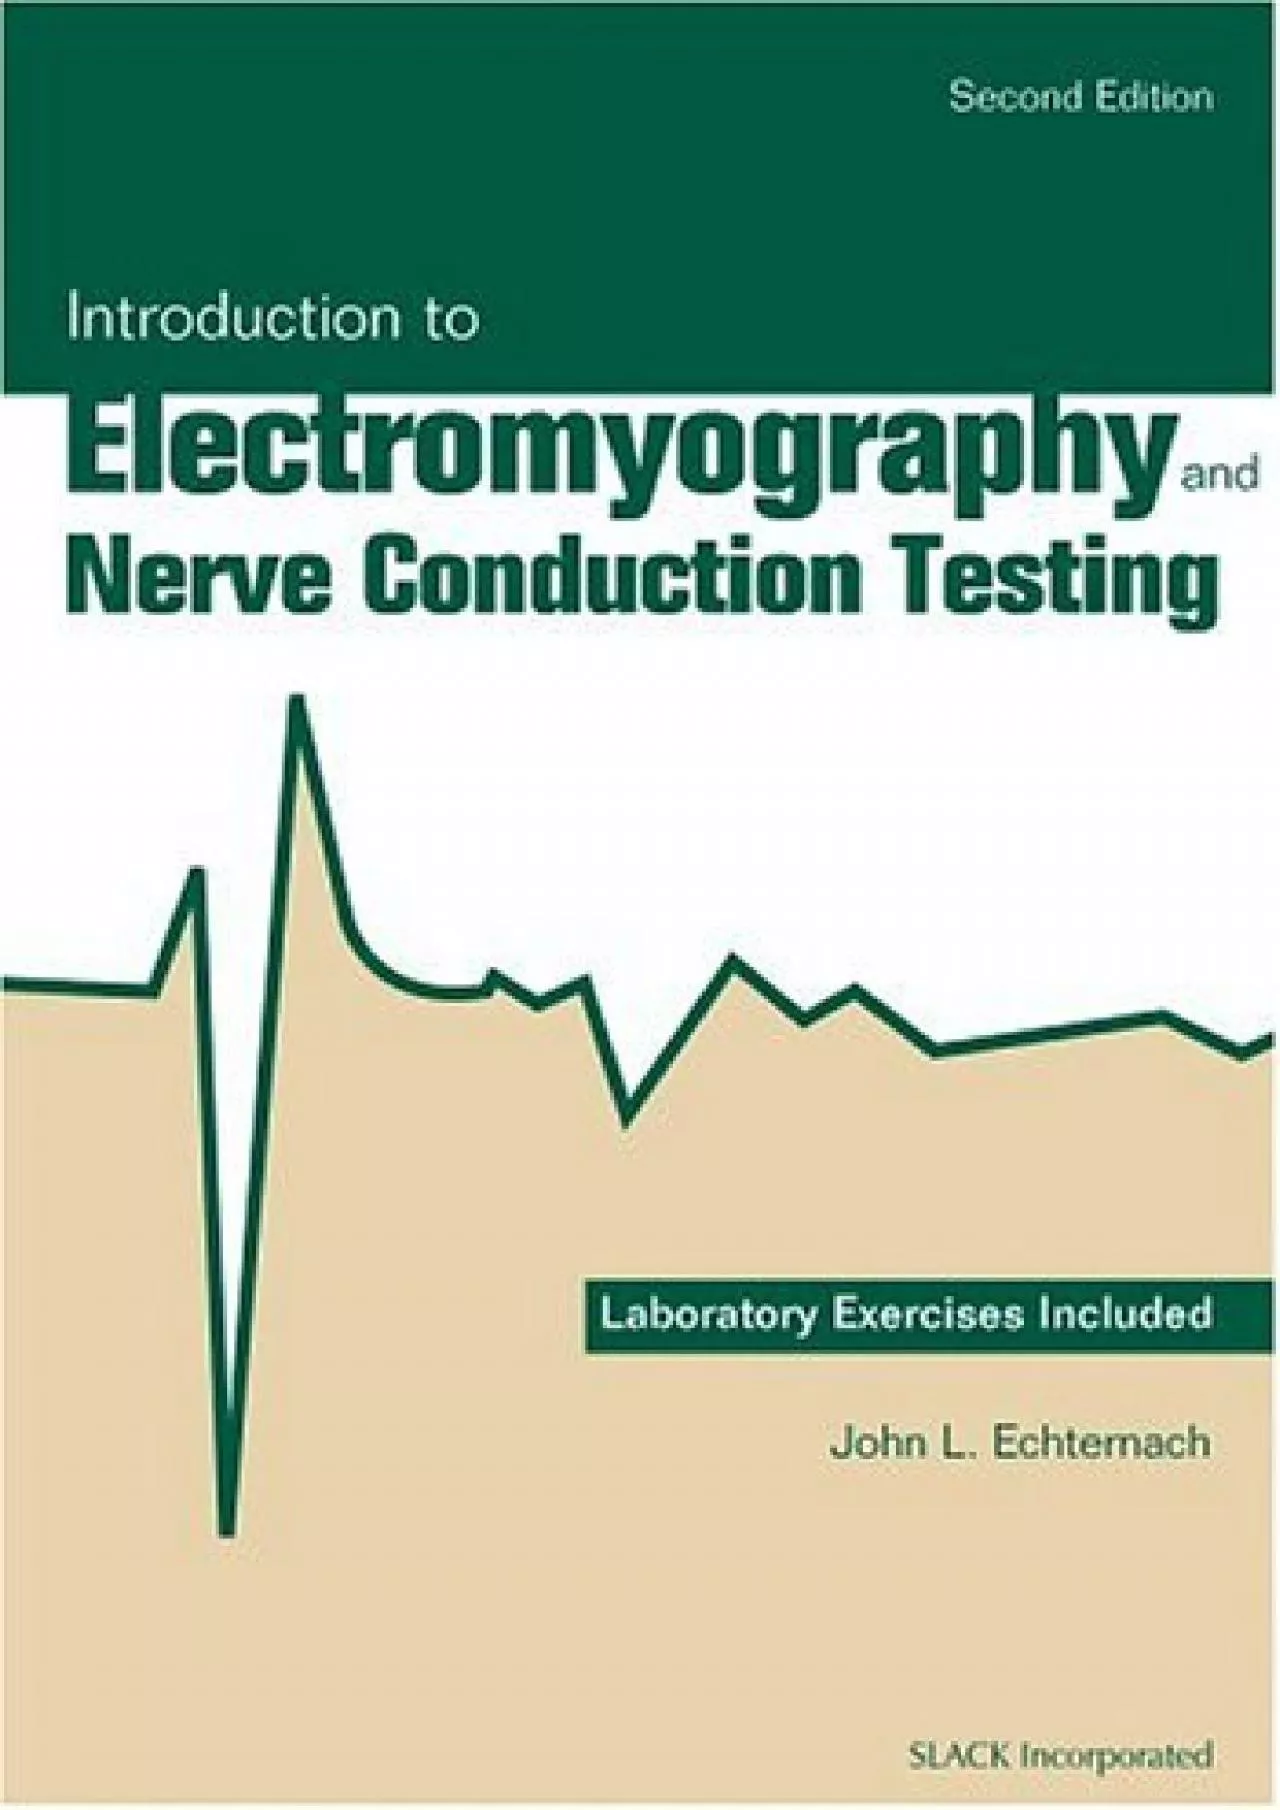 (EBOOK)-Introduction to Electromyography and Nerve Conduction Testing